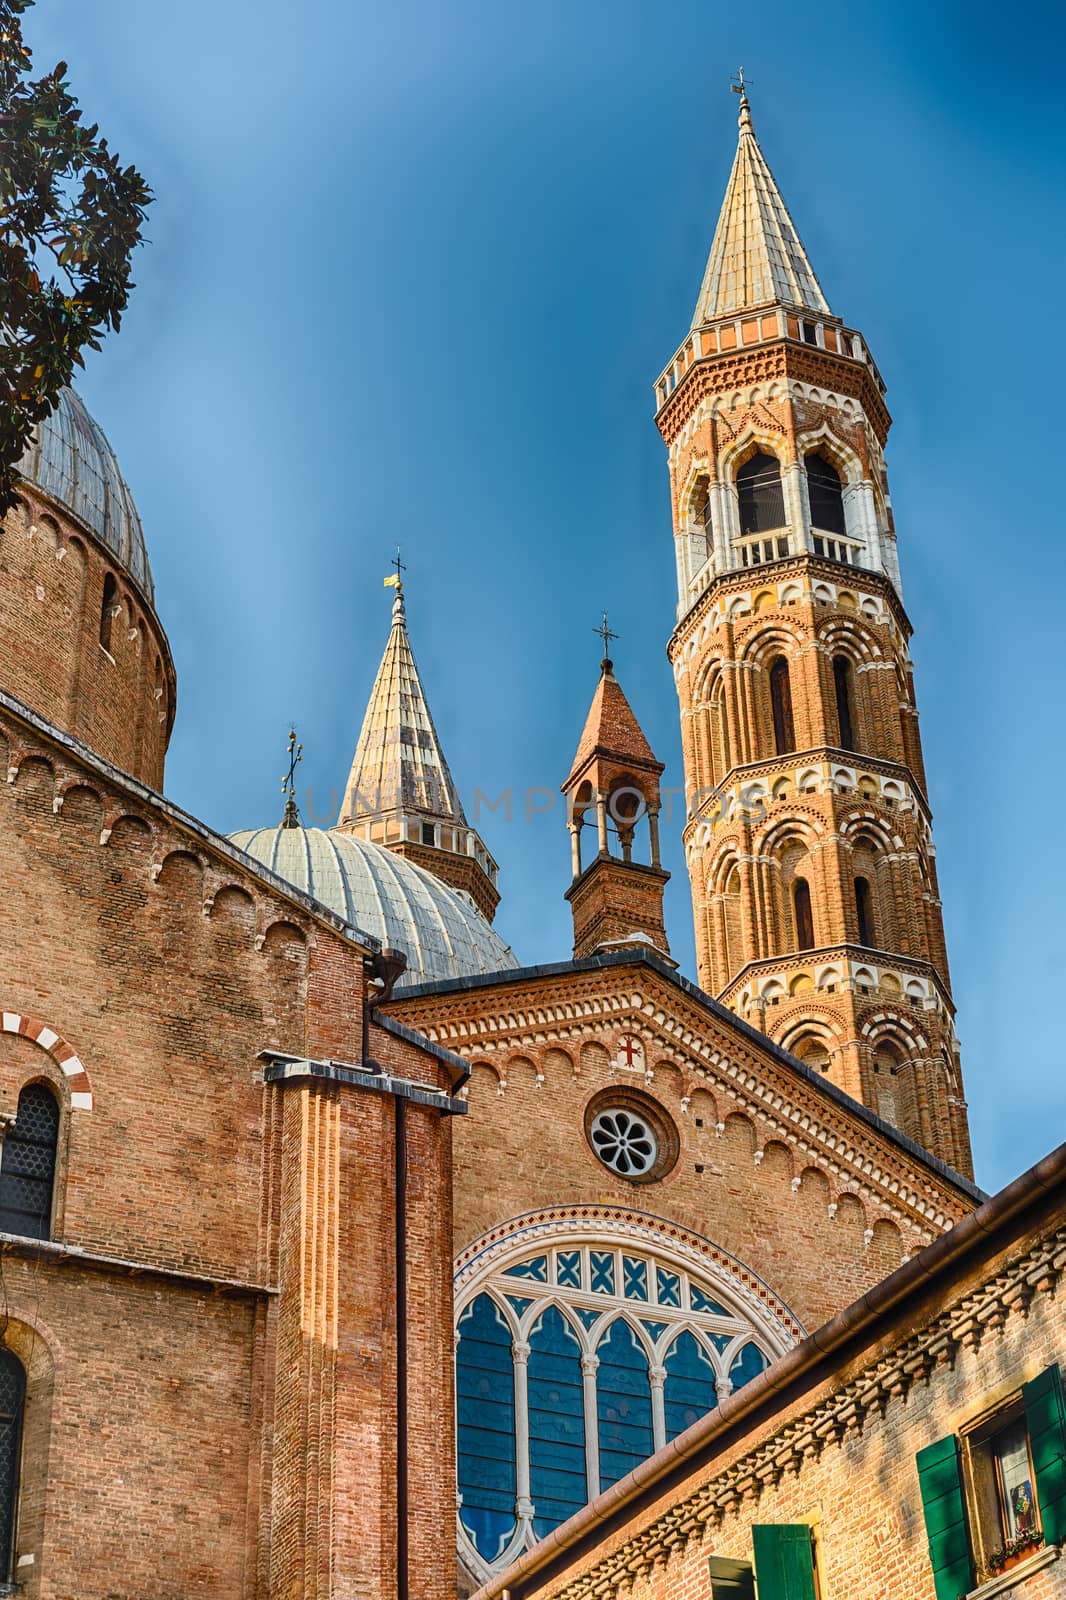 Detail of the Basilica of Saint Anthony, iconic landmark and sightseeing in Padua, Italy